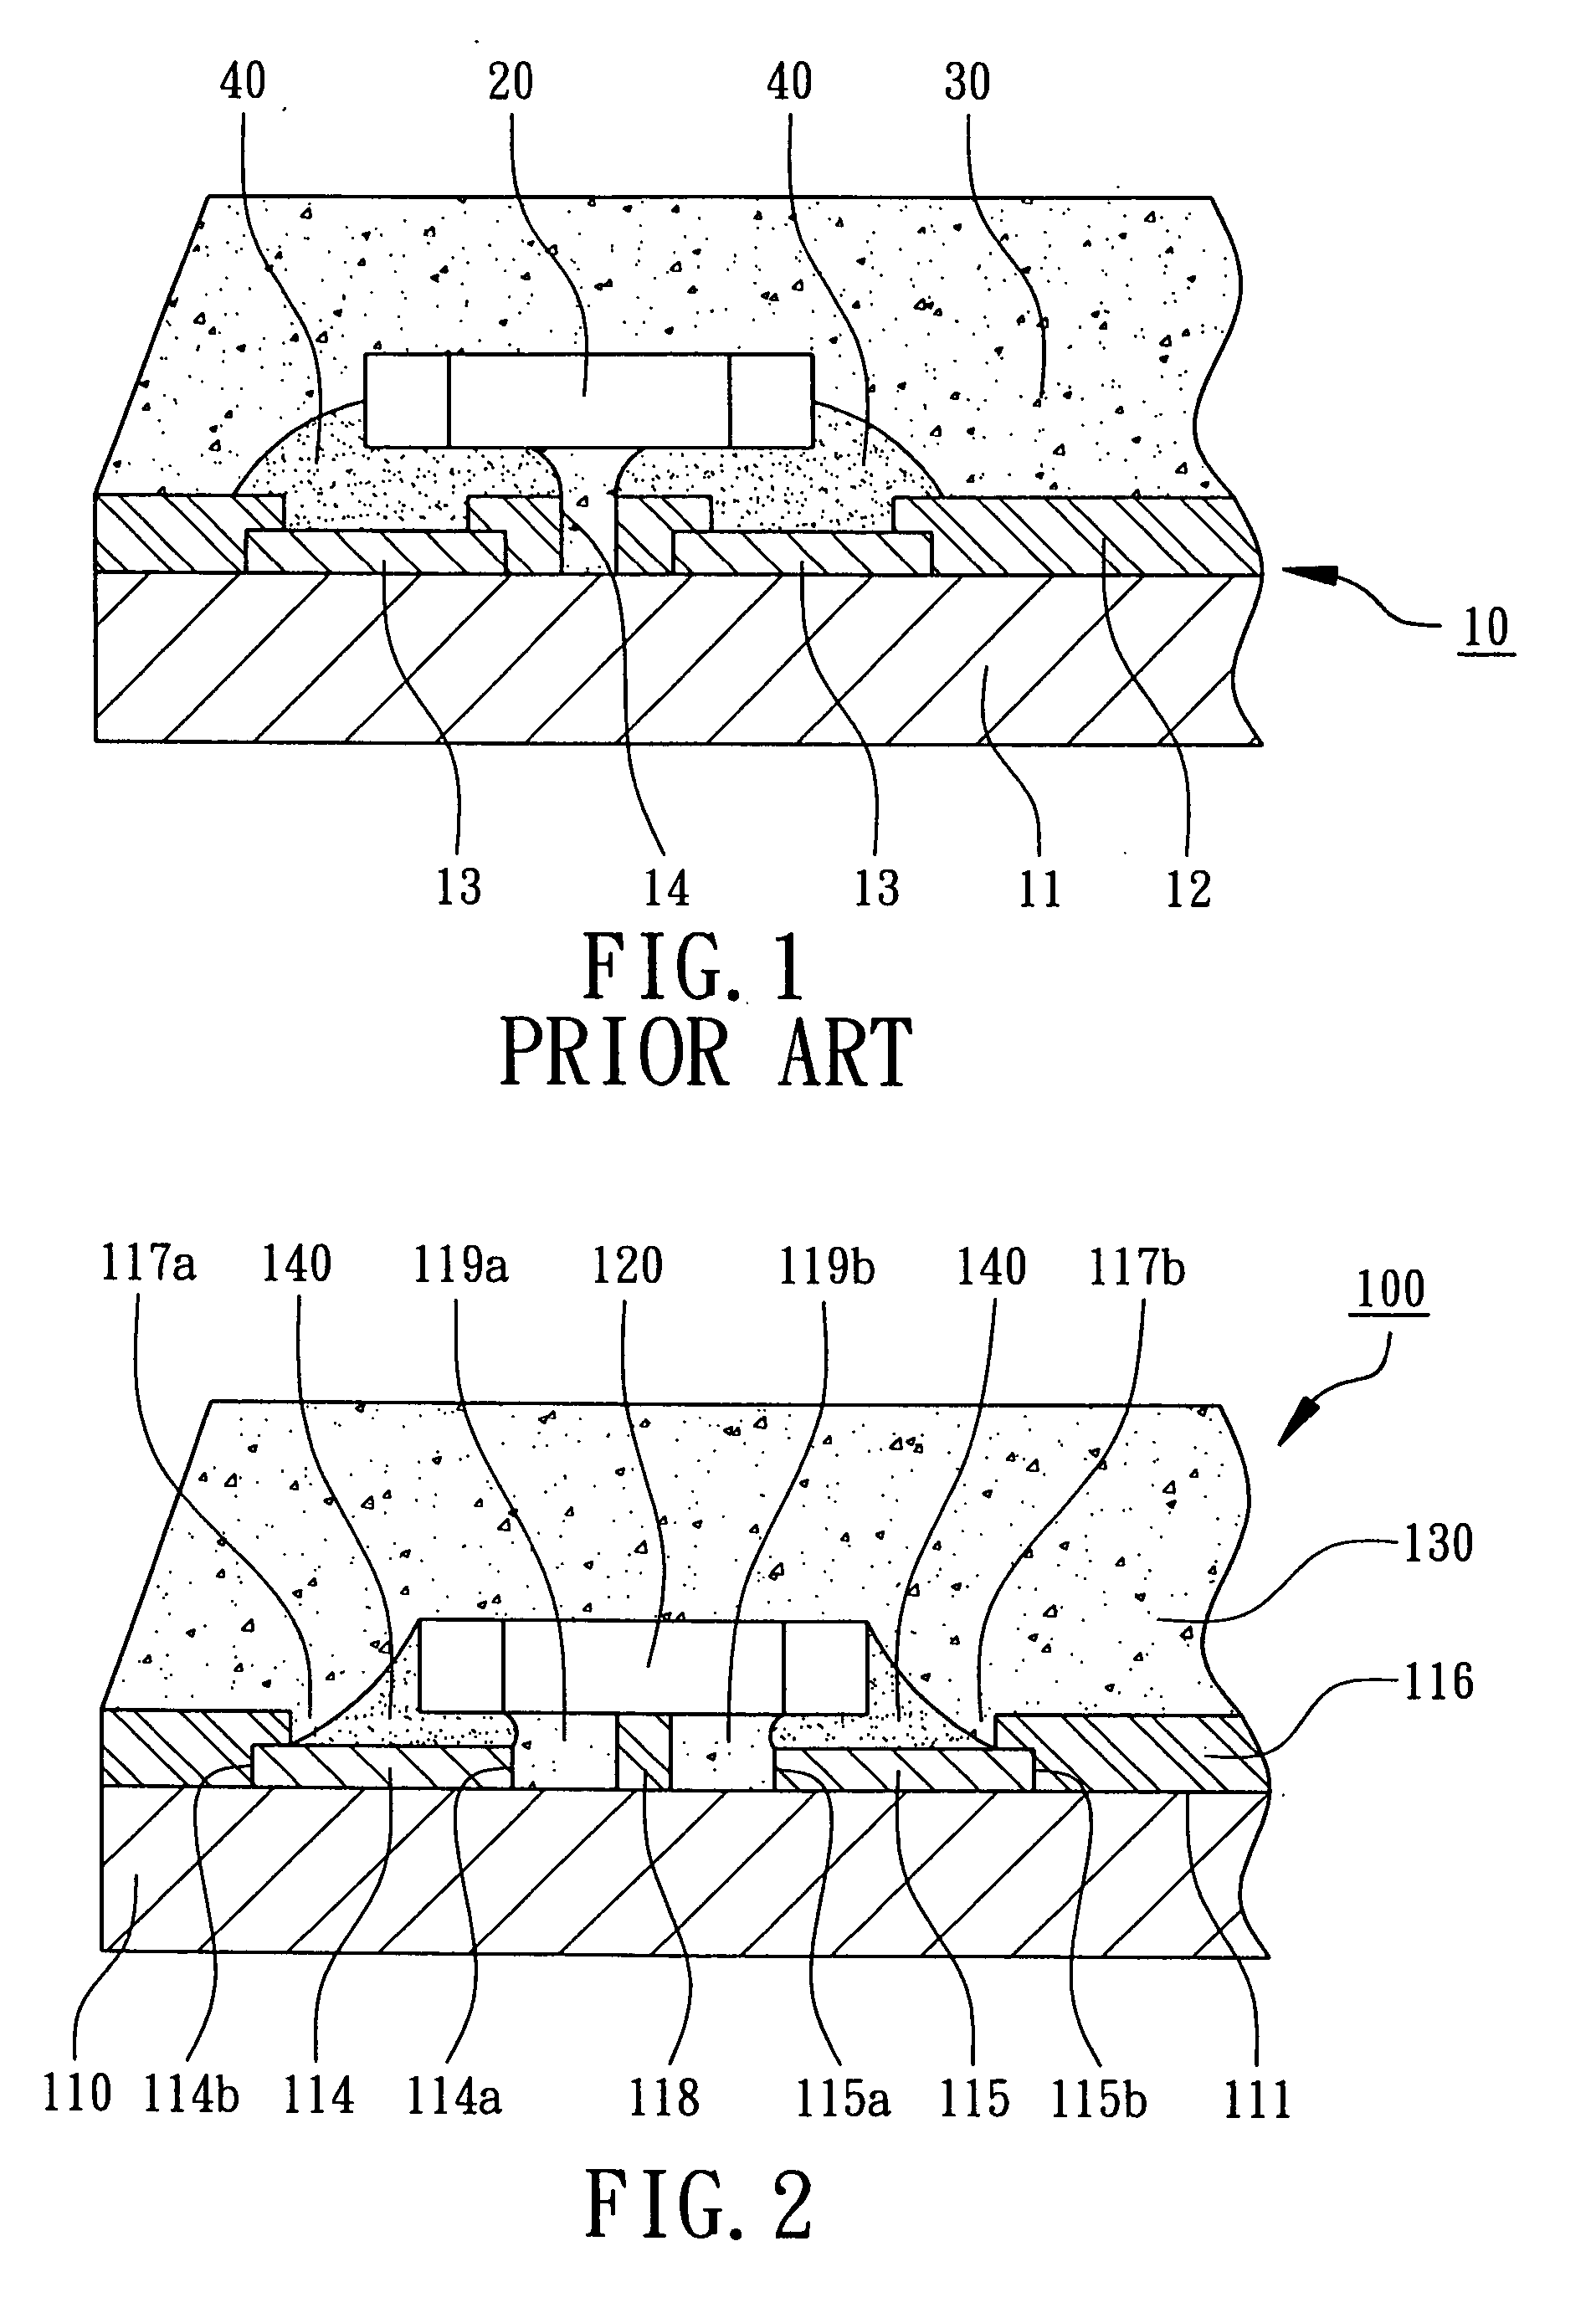 Semiconductor package with encapsulated passive component